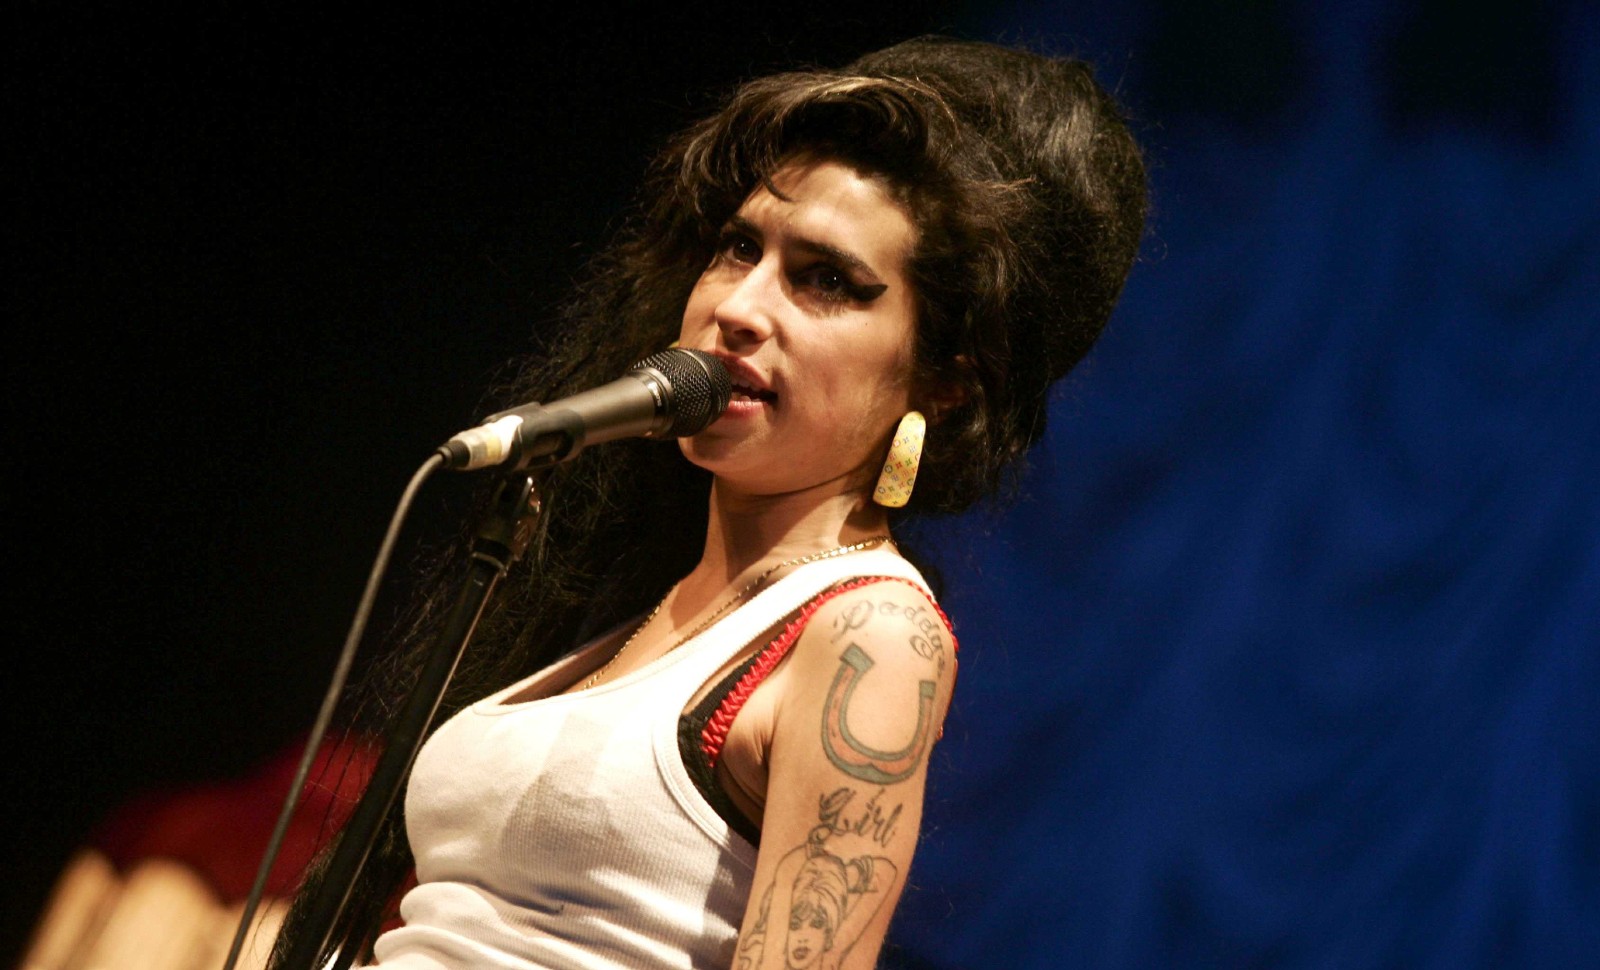 Amy Winehouse: Life is a losing game